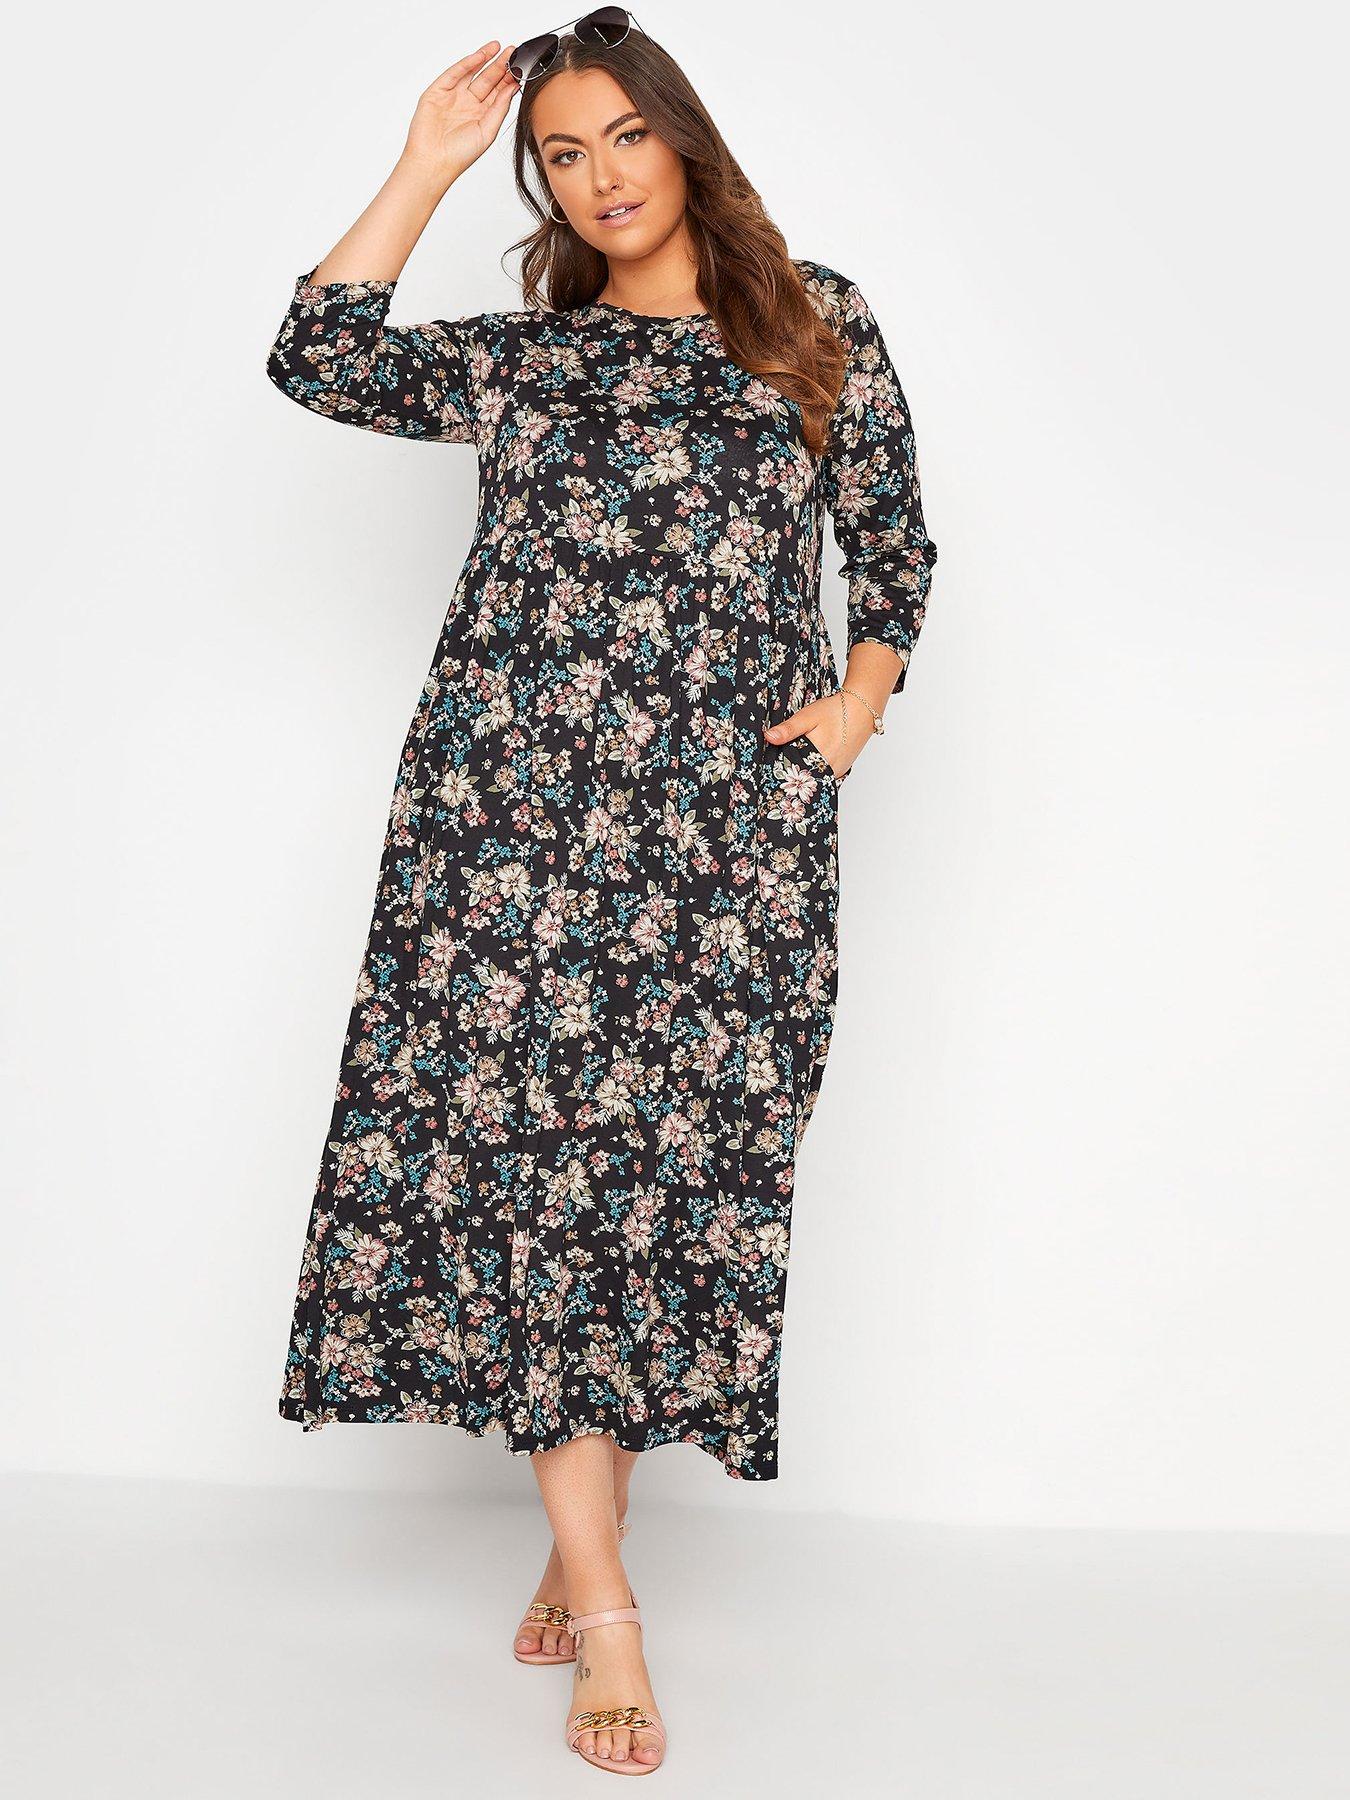  Yours Clothing Floral Dress - Black